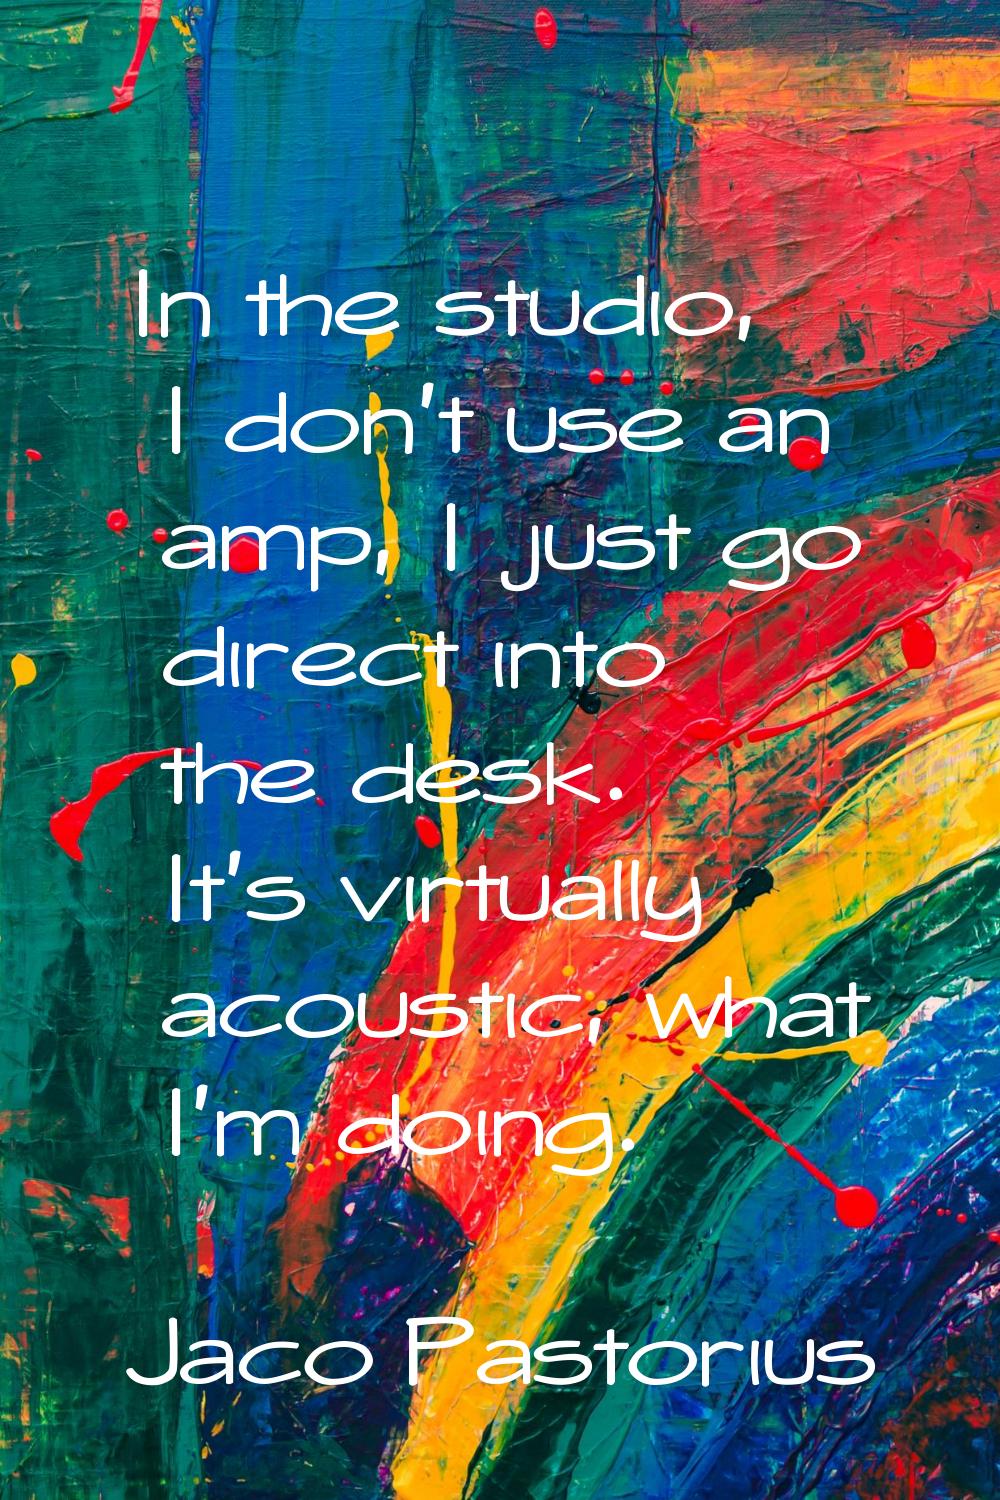 In the studio, I don't use an amp, I just go direct into the desk. It's virtually acoustic, what I'